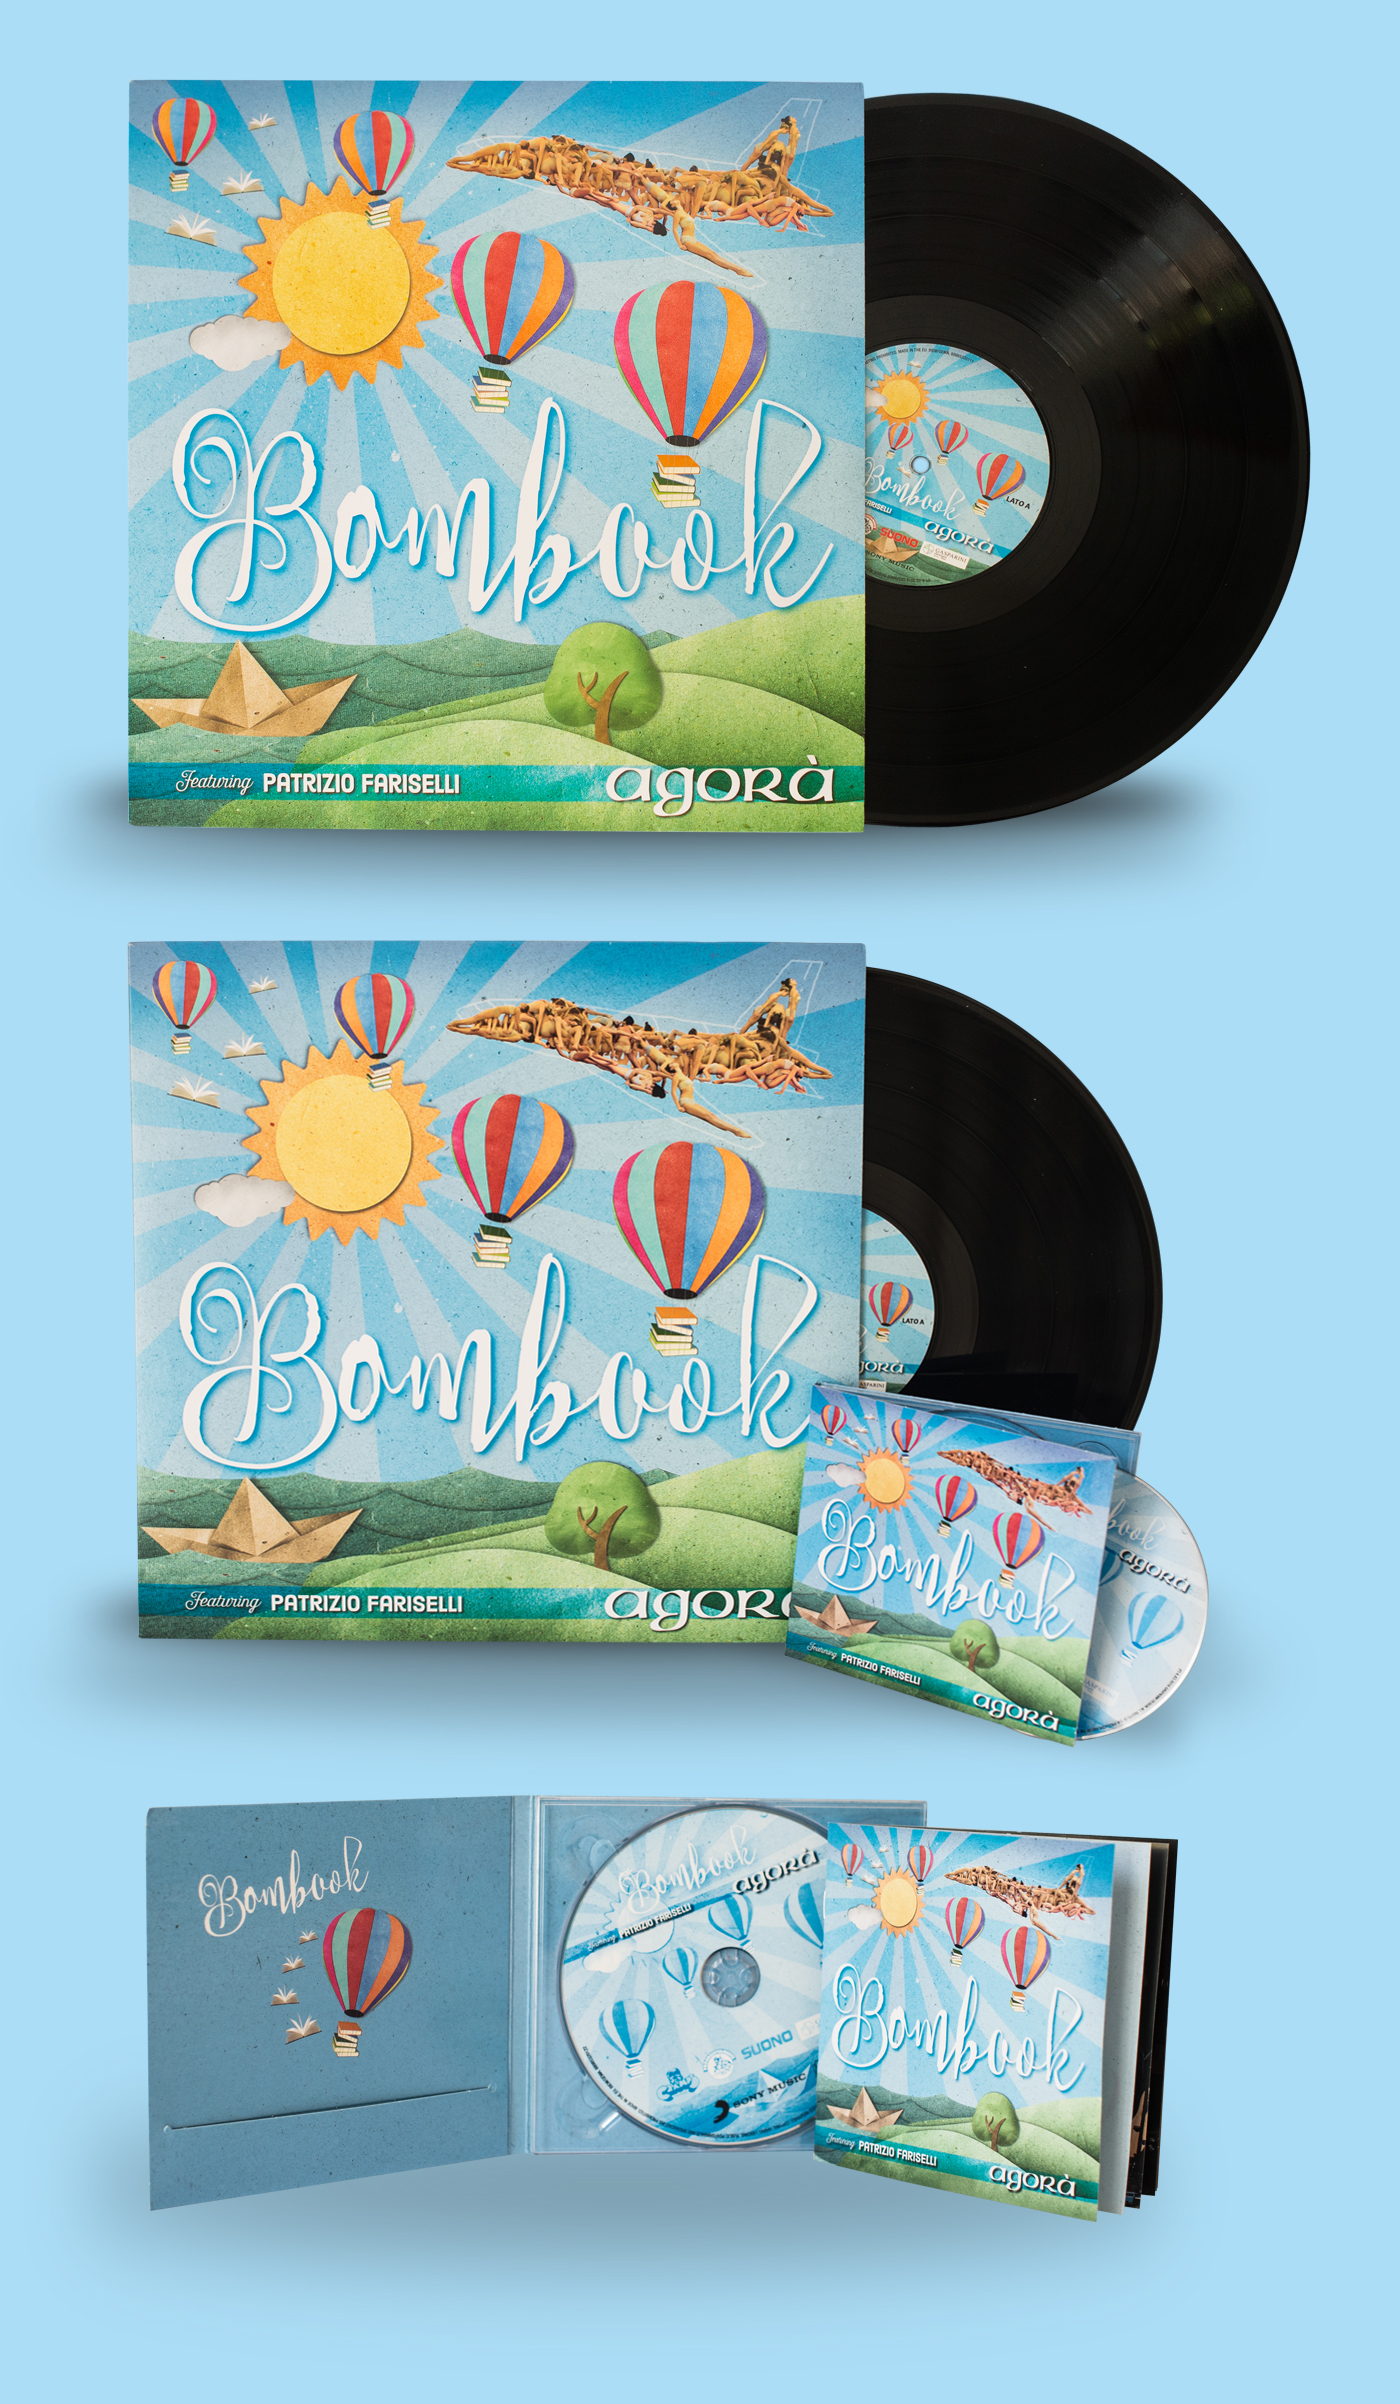 vynil cd music cover artwork package